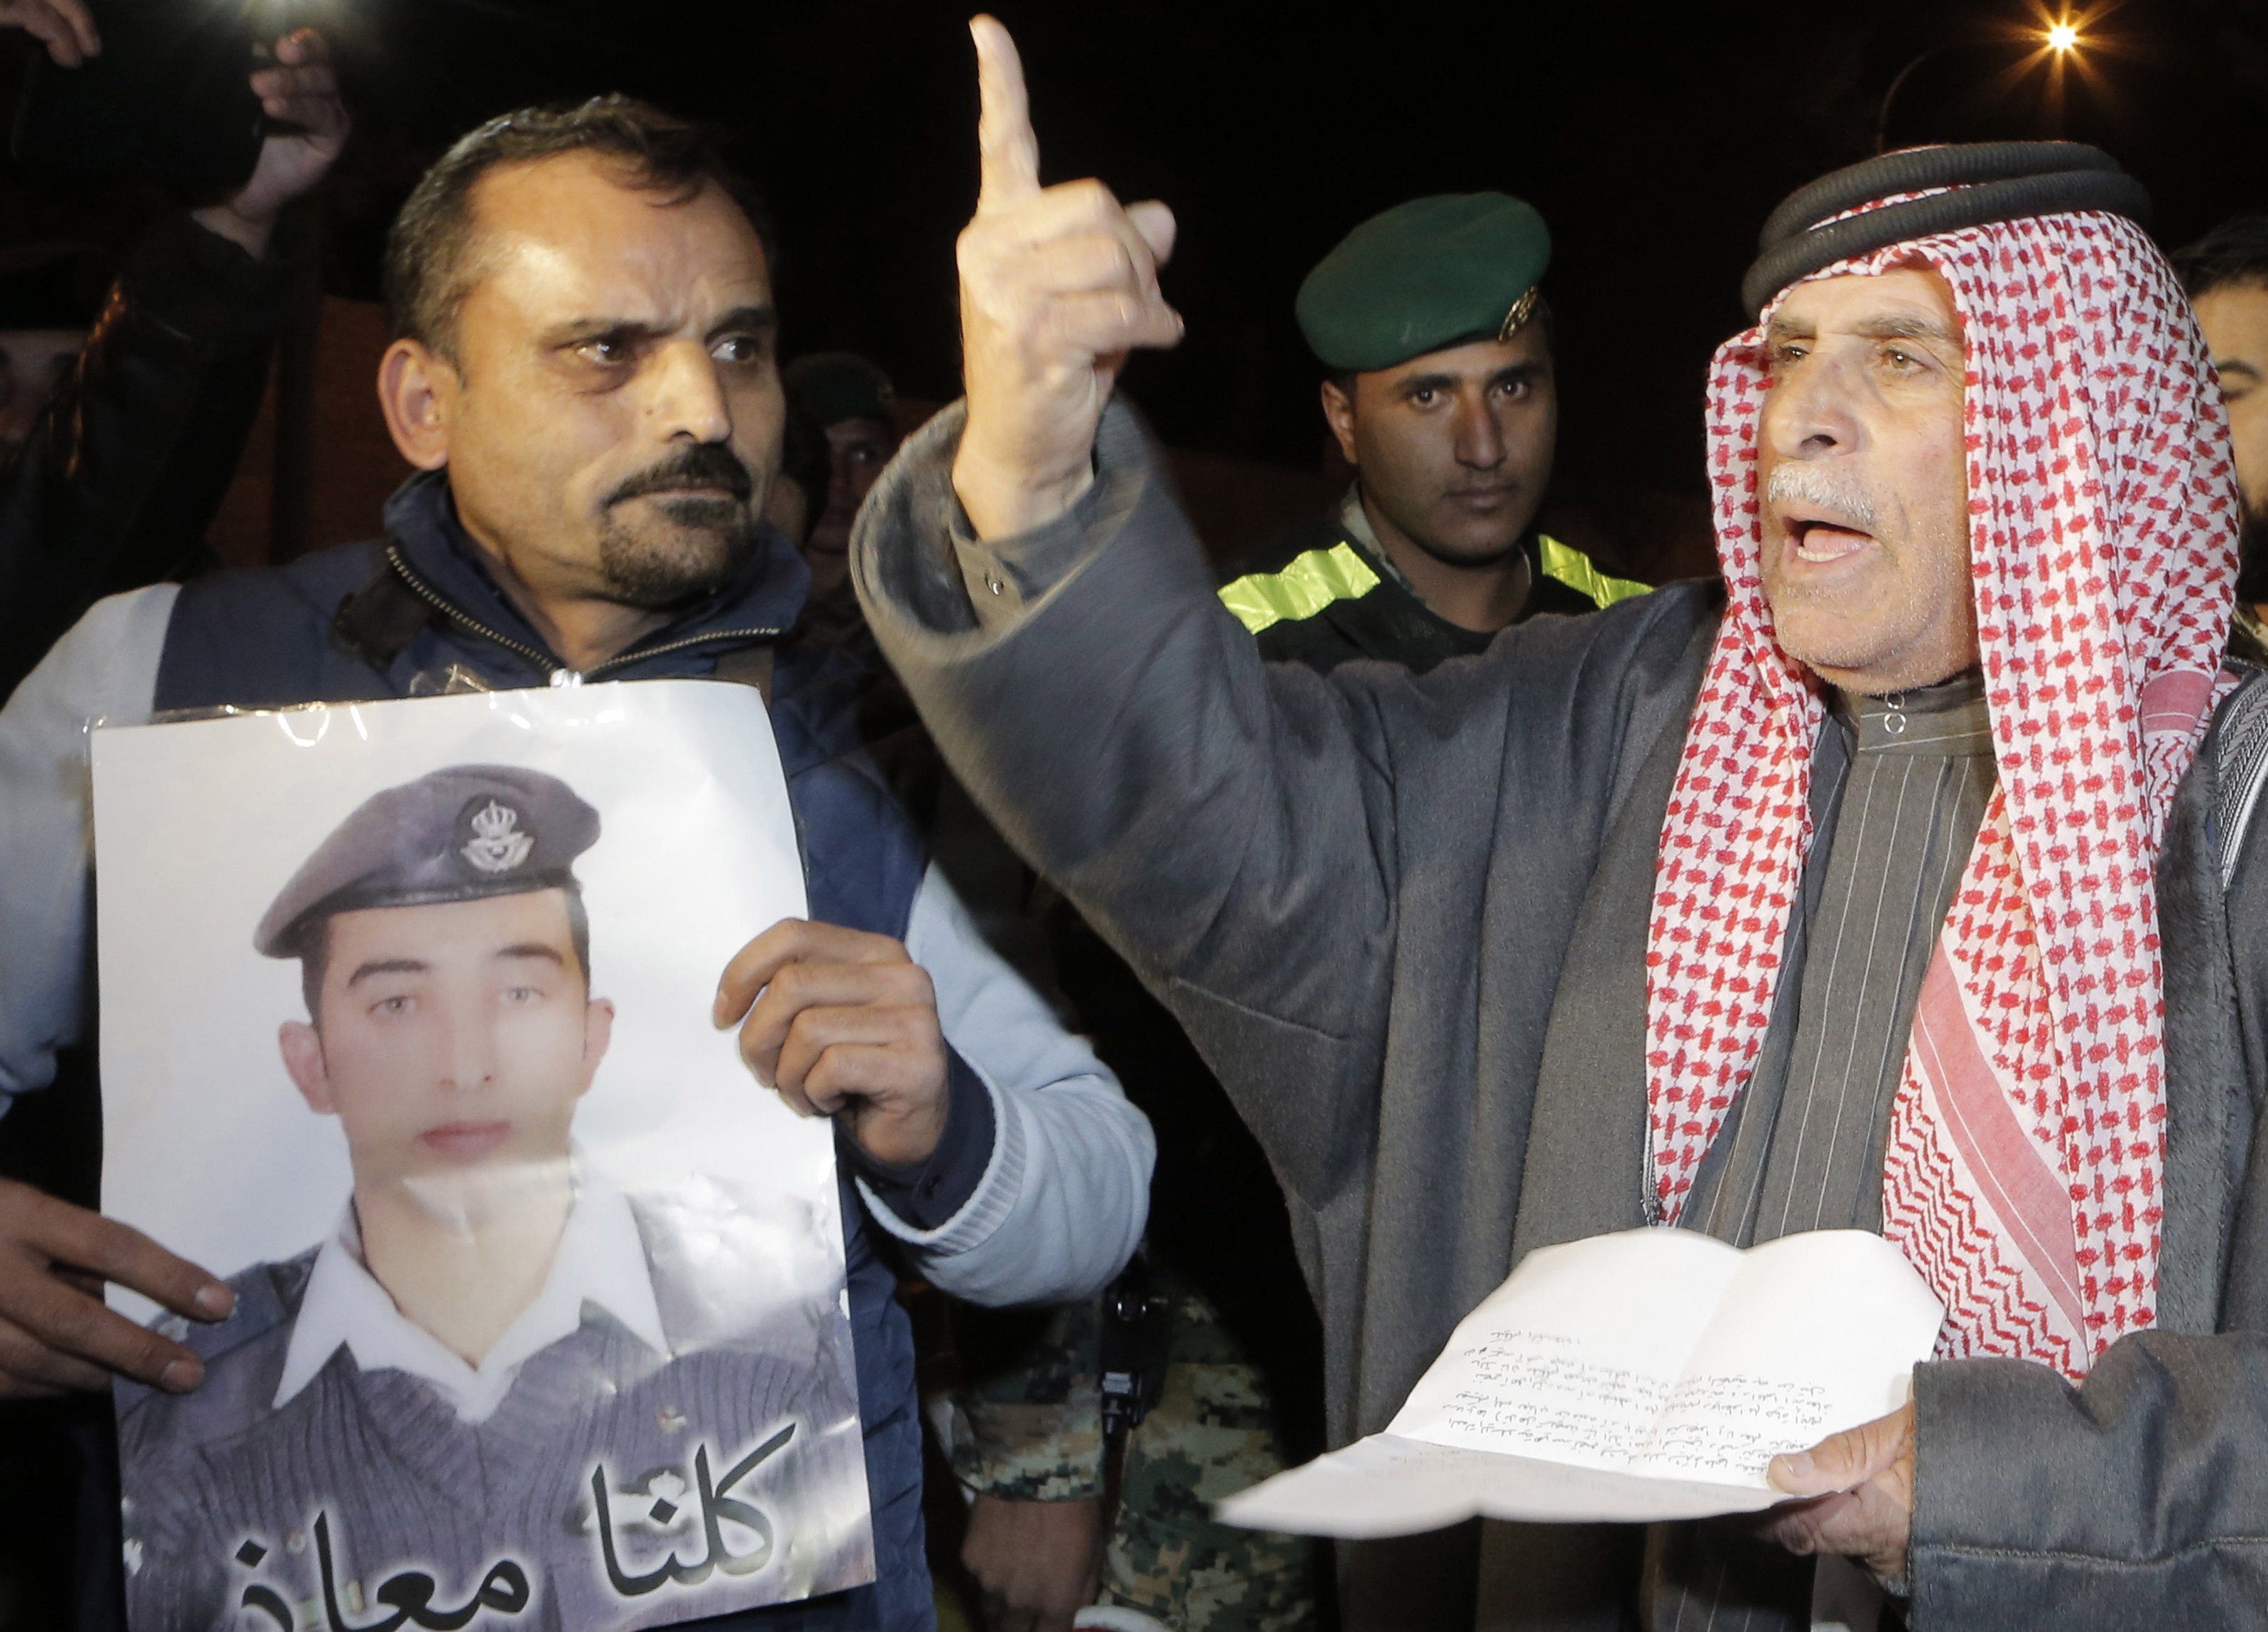 Safi al-Kasasbeh, right, the father of Jordanian pilot Moaz al-Kasasbeh (portrait), who was captured by ISIS militants on December 24, protests outside the Royal court in Amman on Jan. 28, 2015. (Khalil Mazraawi—AFP/Getty Images)